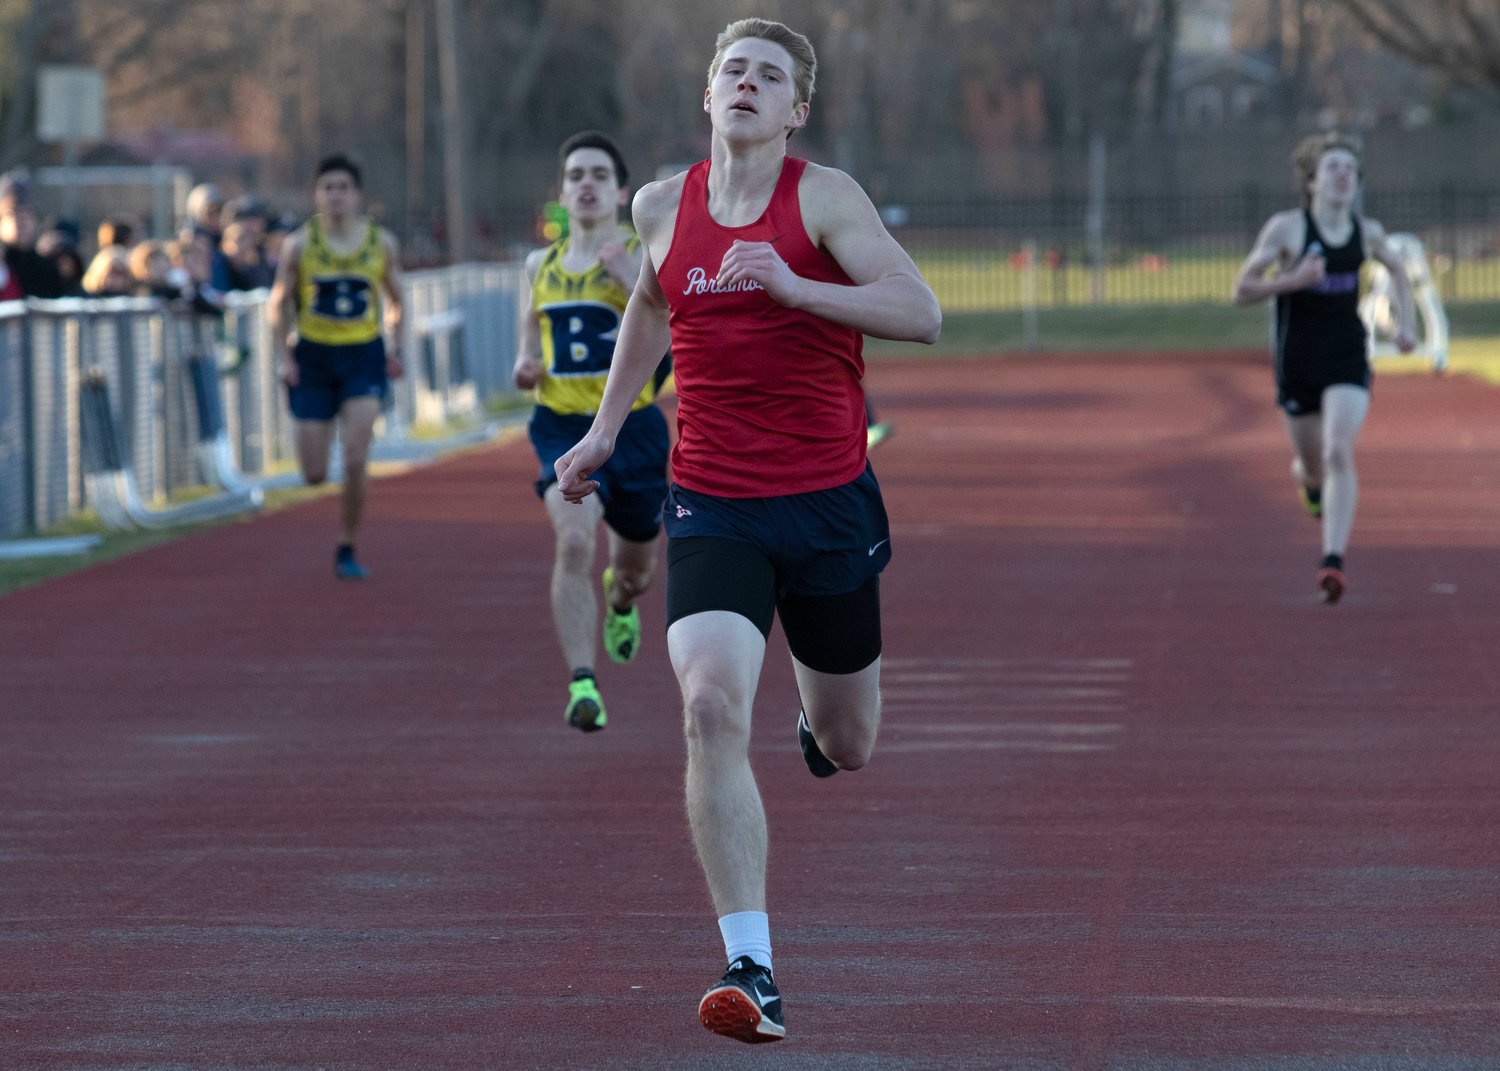 Jeff Brady won the 400-meter dash for the Patriots, posting a time of 53.2 seconds.